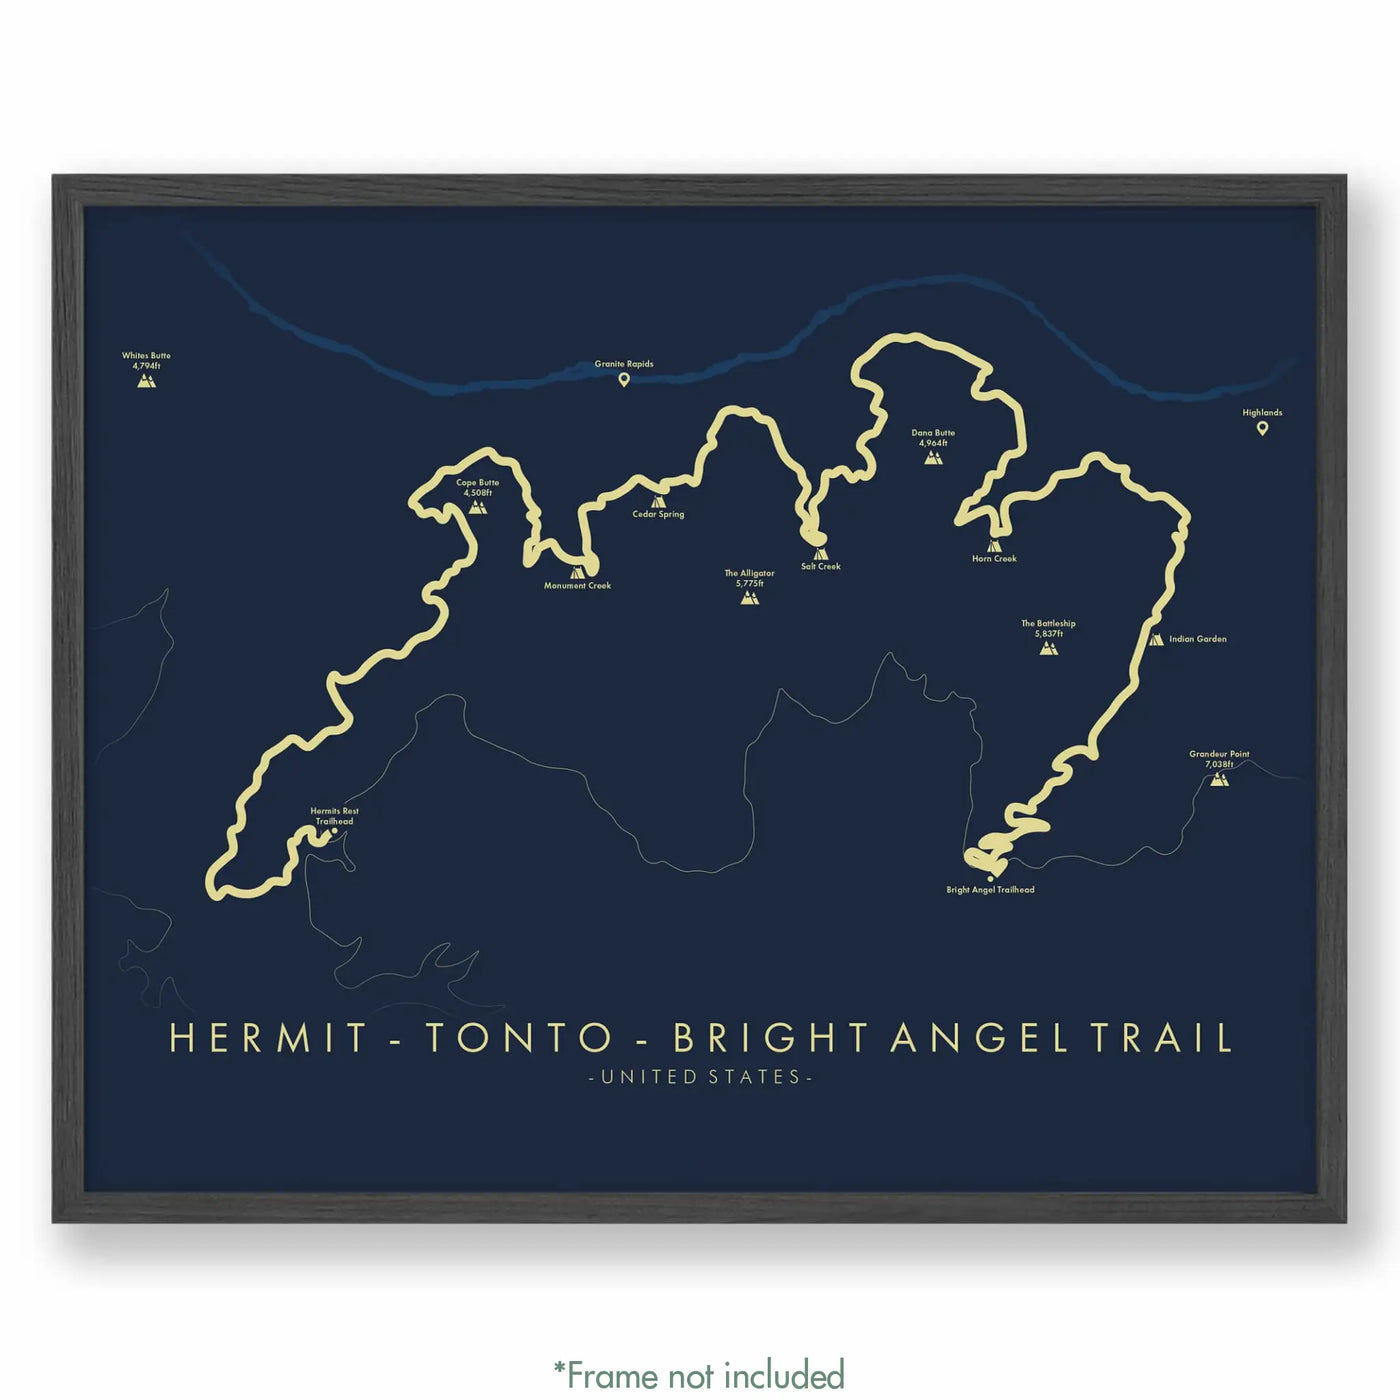 Trail Poster of Hermit Tonto Bright Angel Trail - Blue